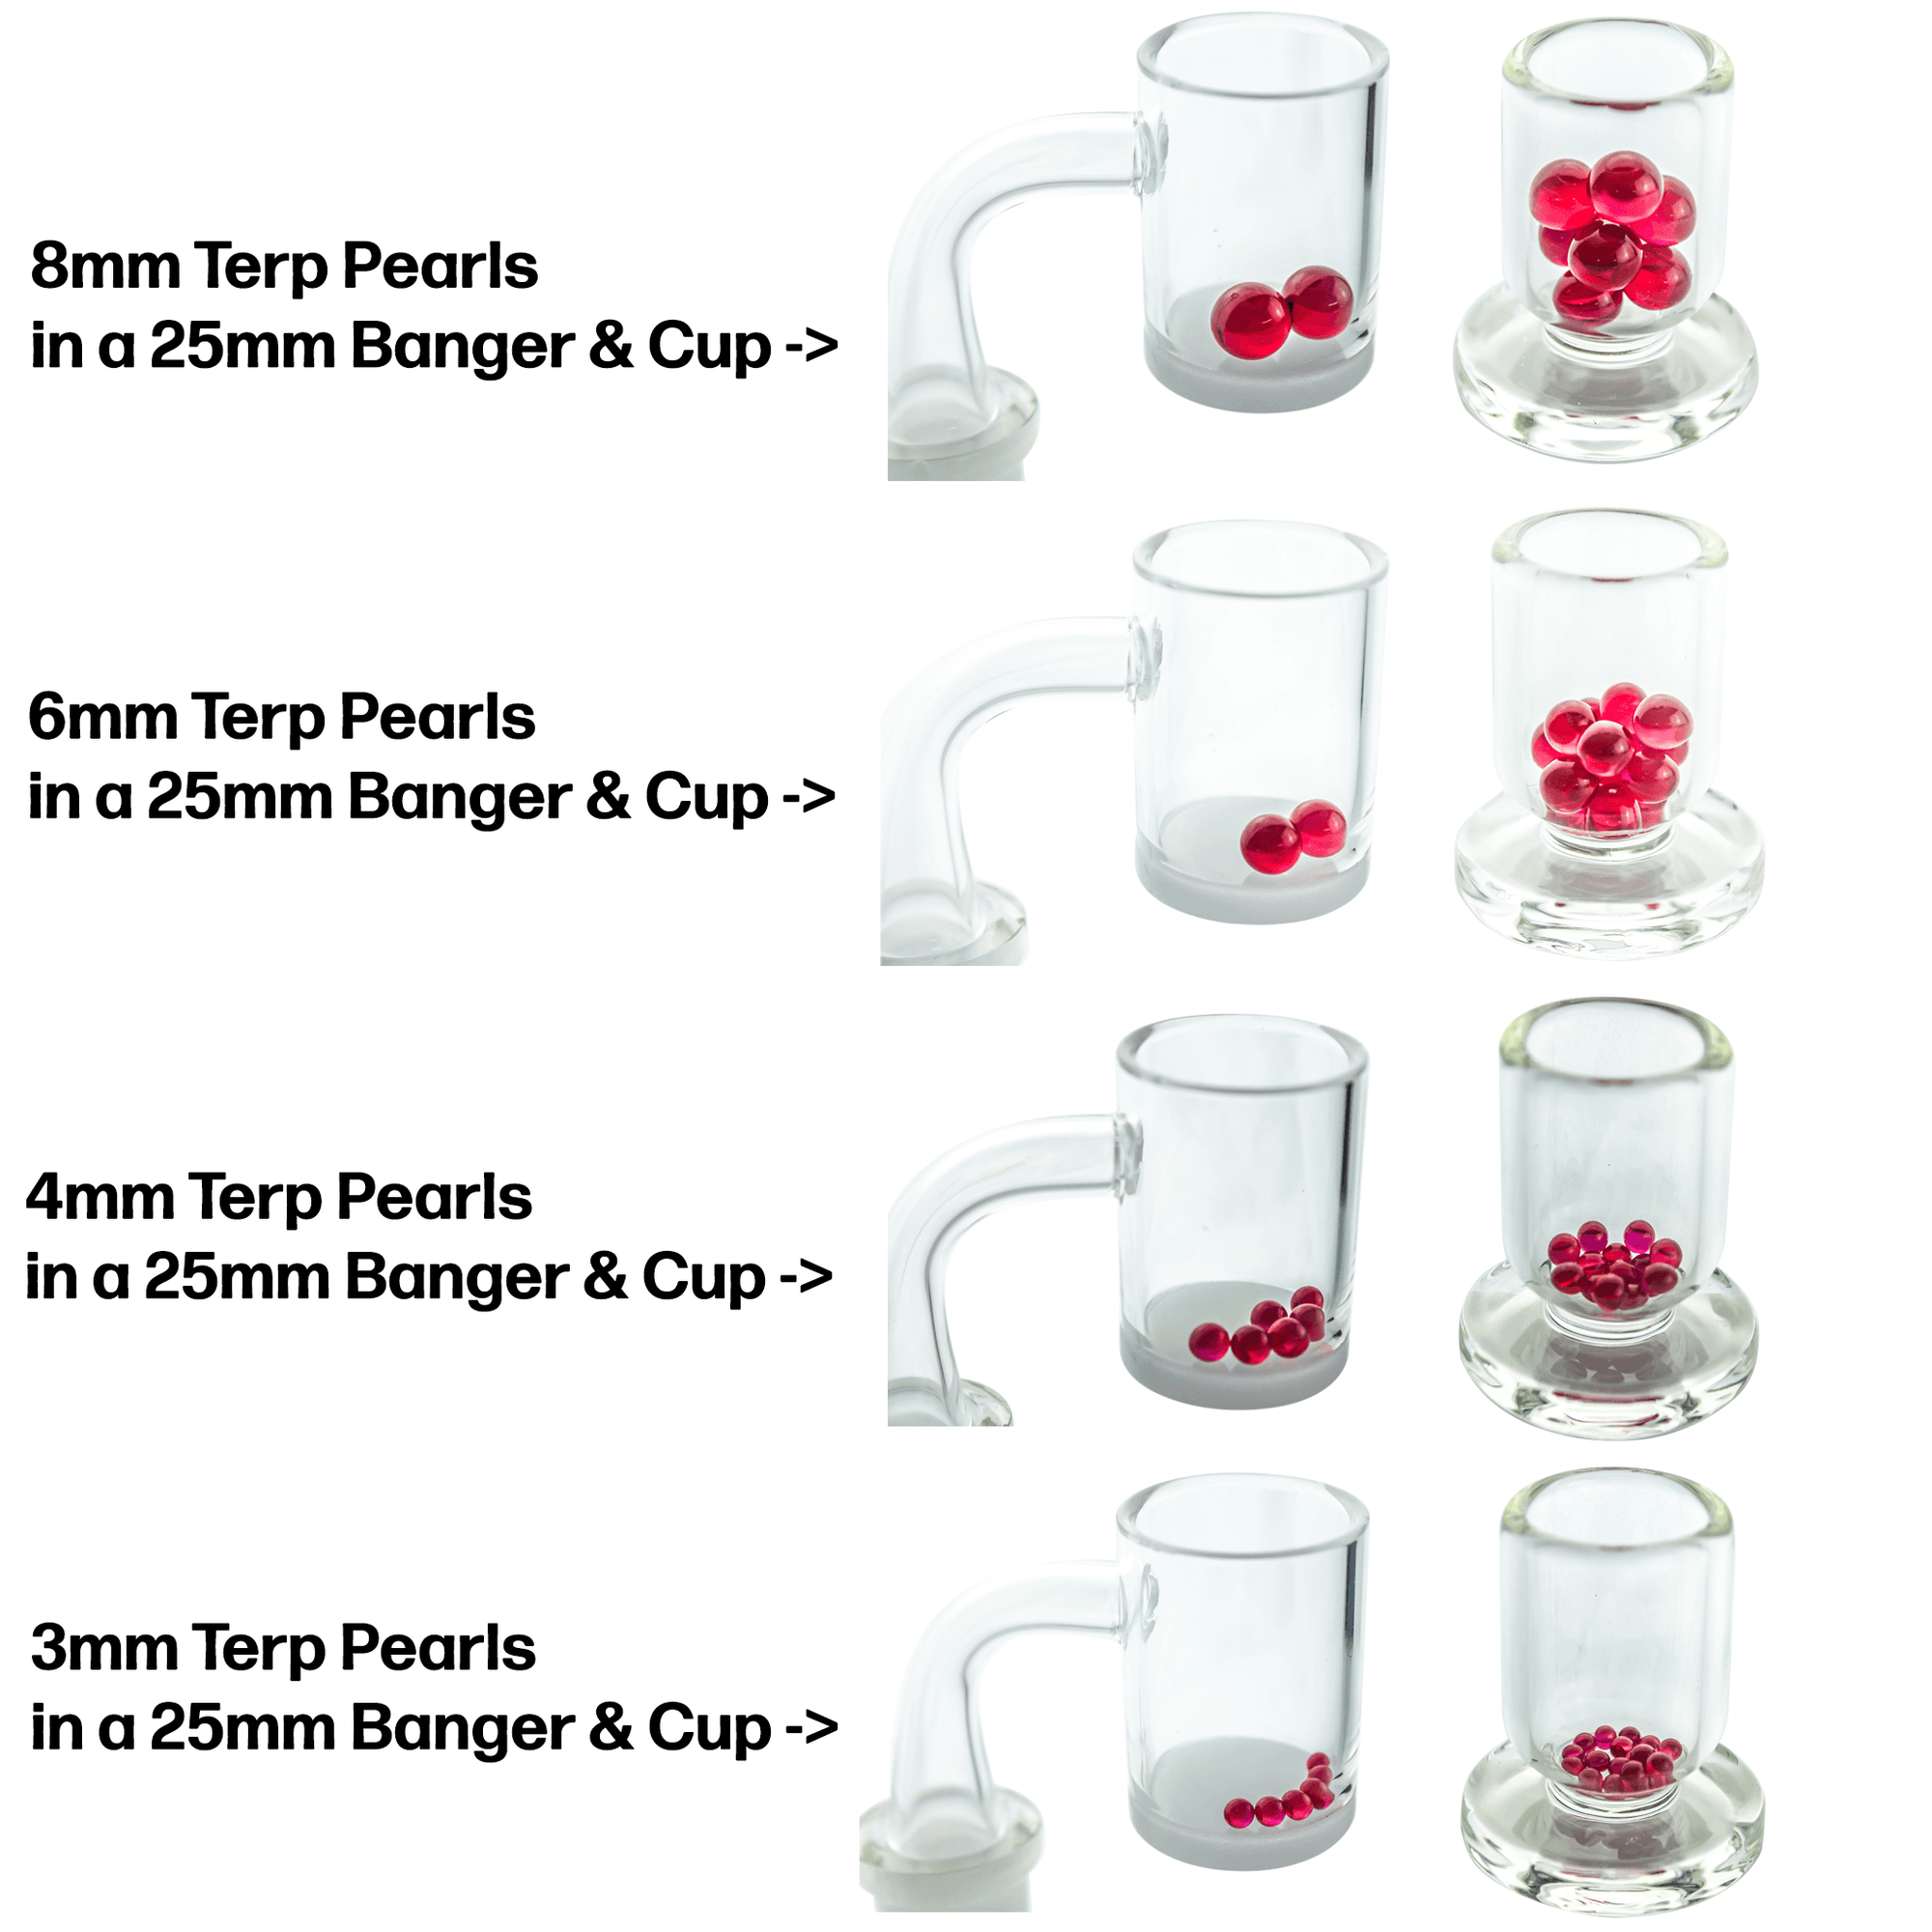 6mm Terp (Dab) Pearls-Ruby | Terp Pearl Size Chart View | Dabbing Warehouse